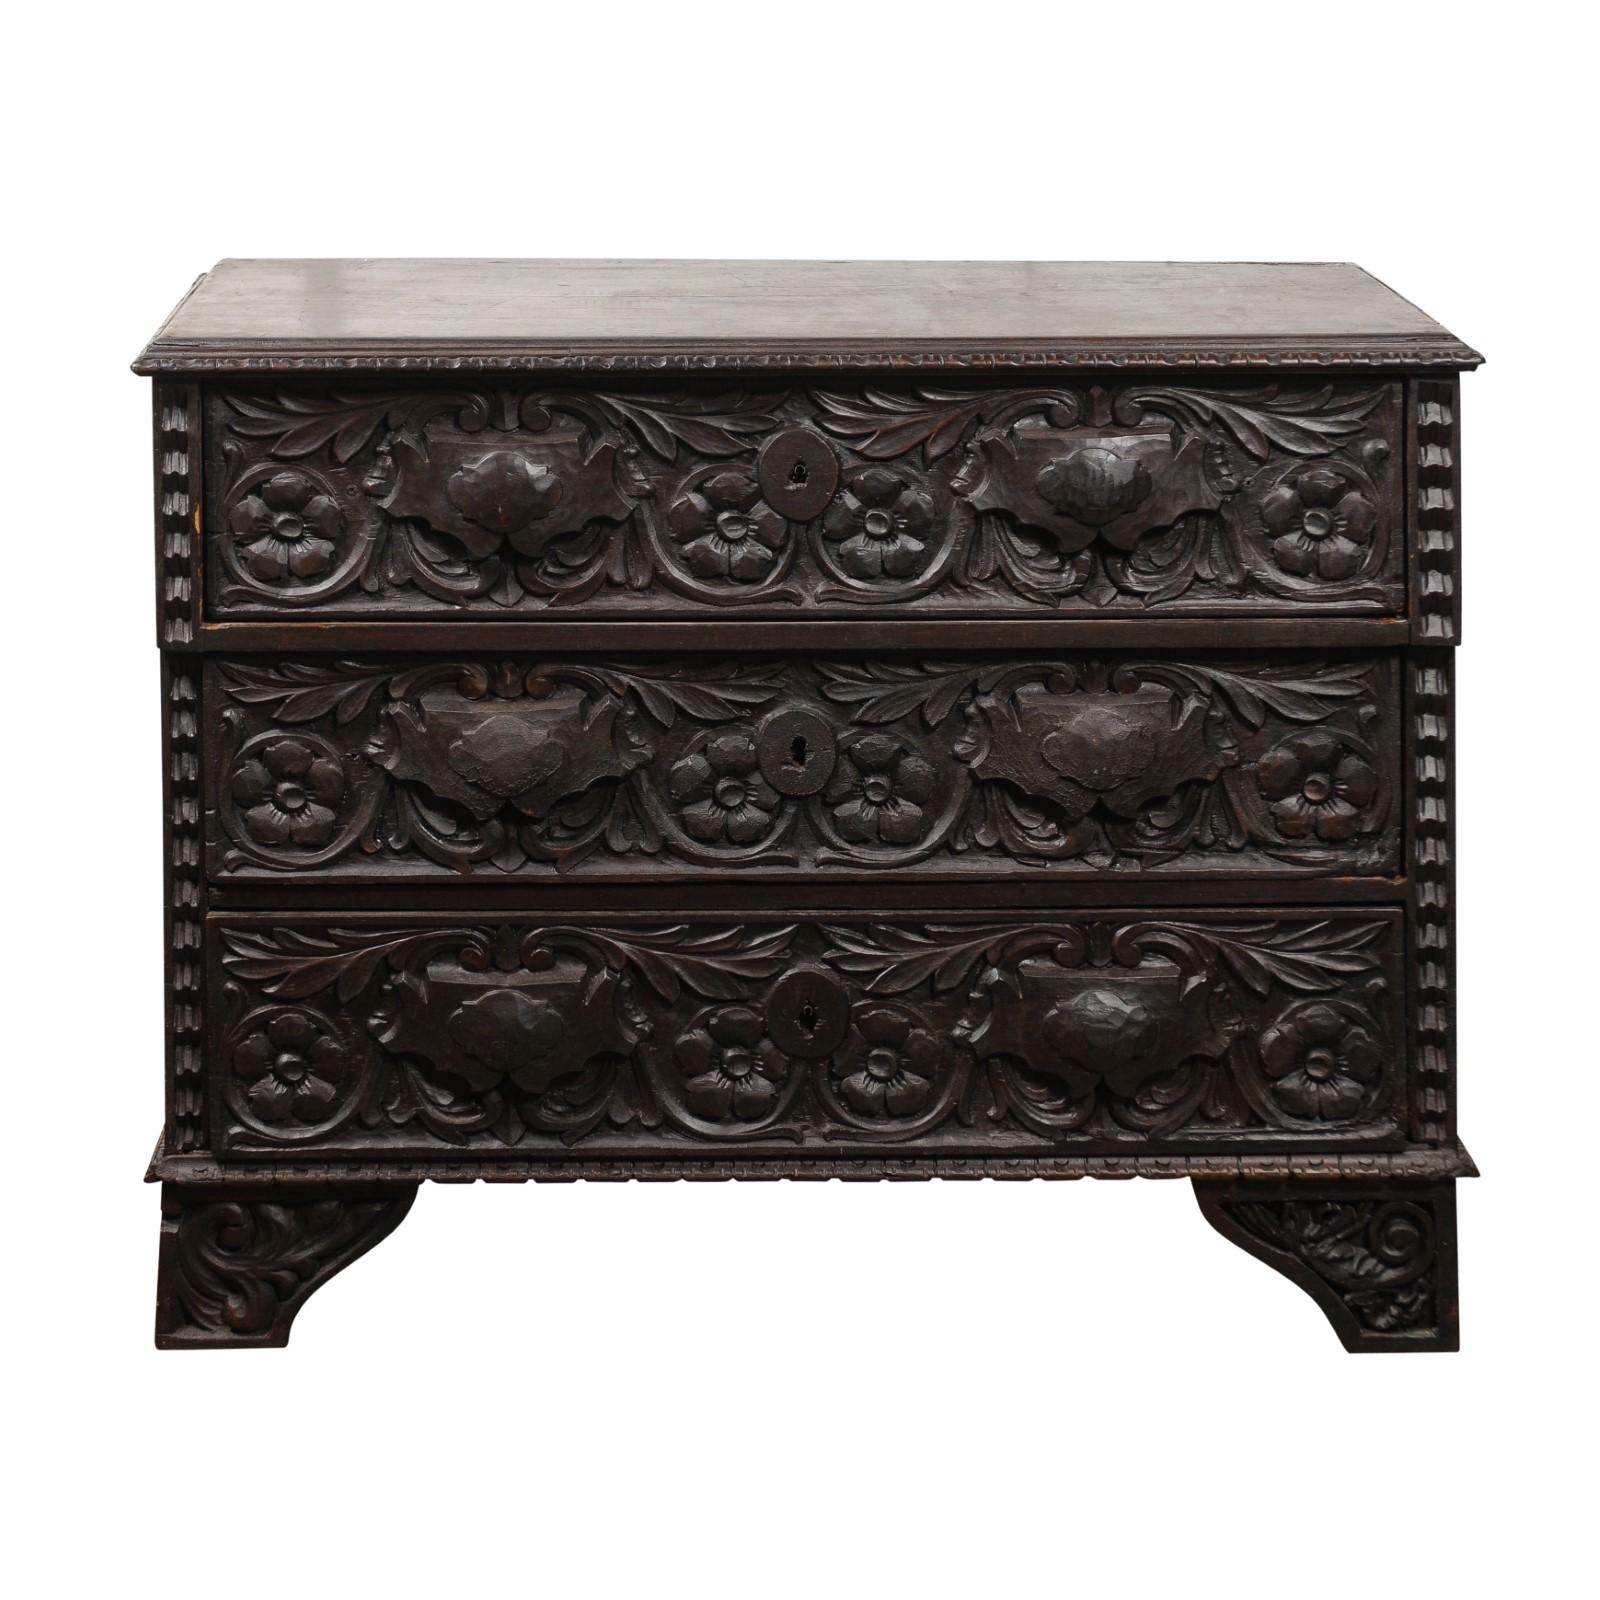 Italian 1860s Three-Drawer Commode with Hand-Carved Scrollwork and Dark Patina